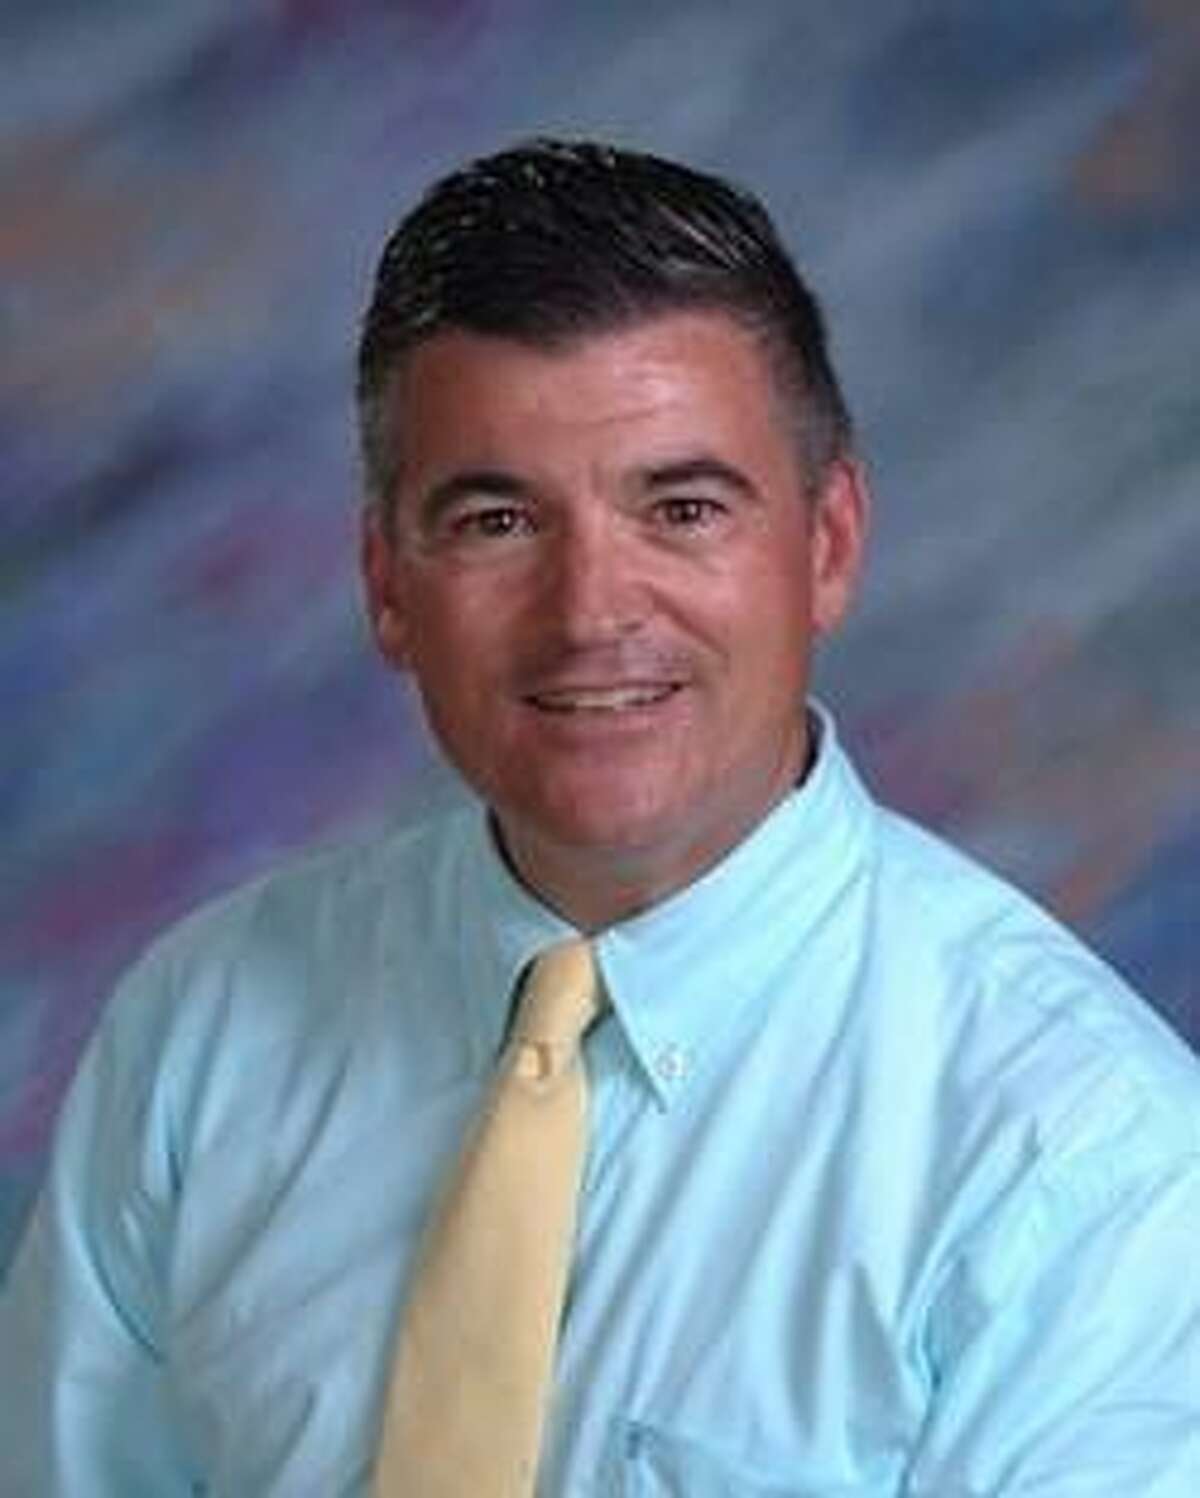 Patrick D. Higgins, of Bethel, will become the principal of Immaculate High School on July 1.